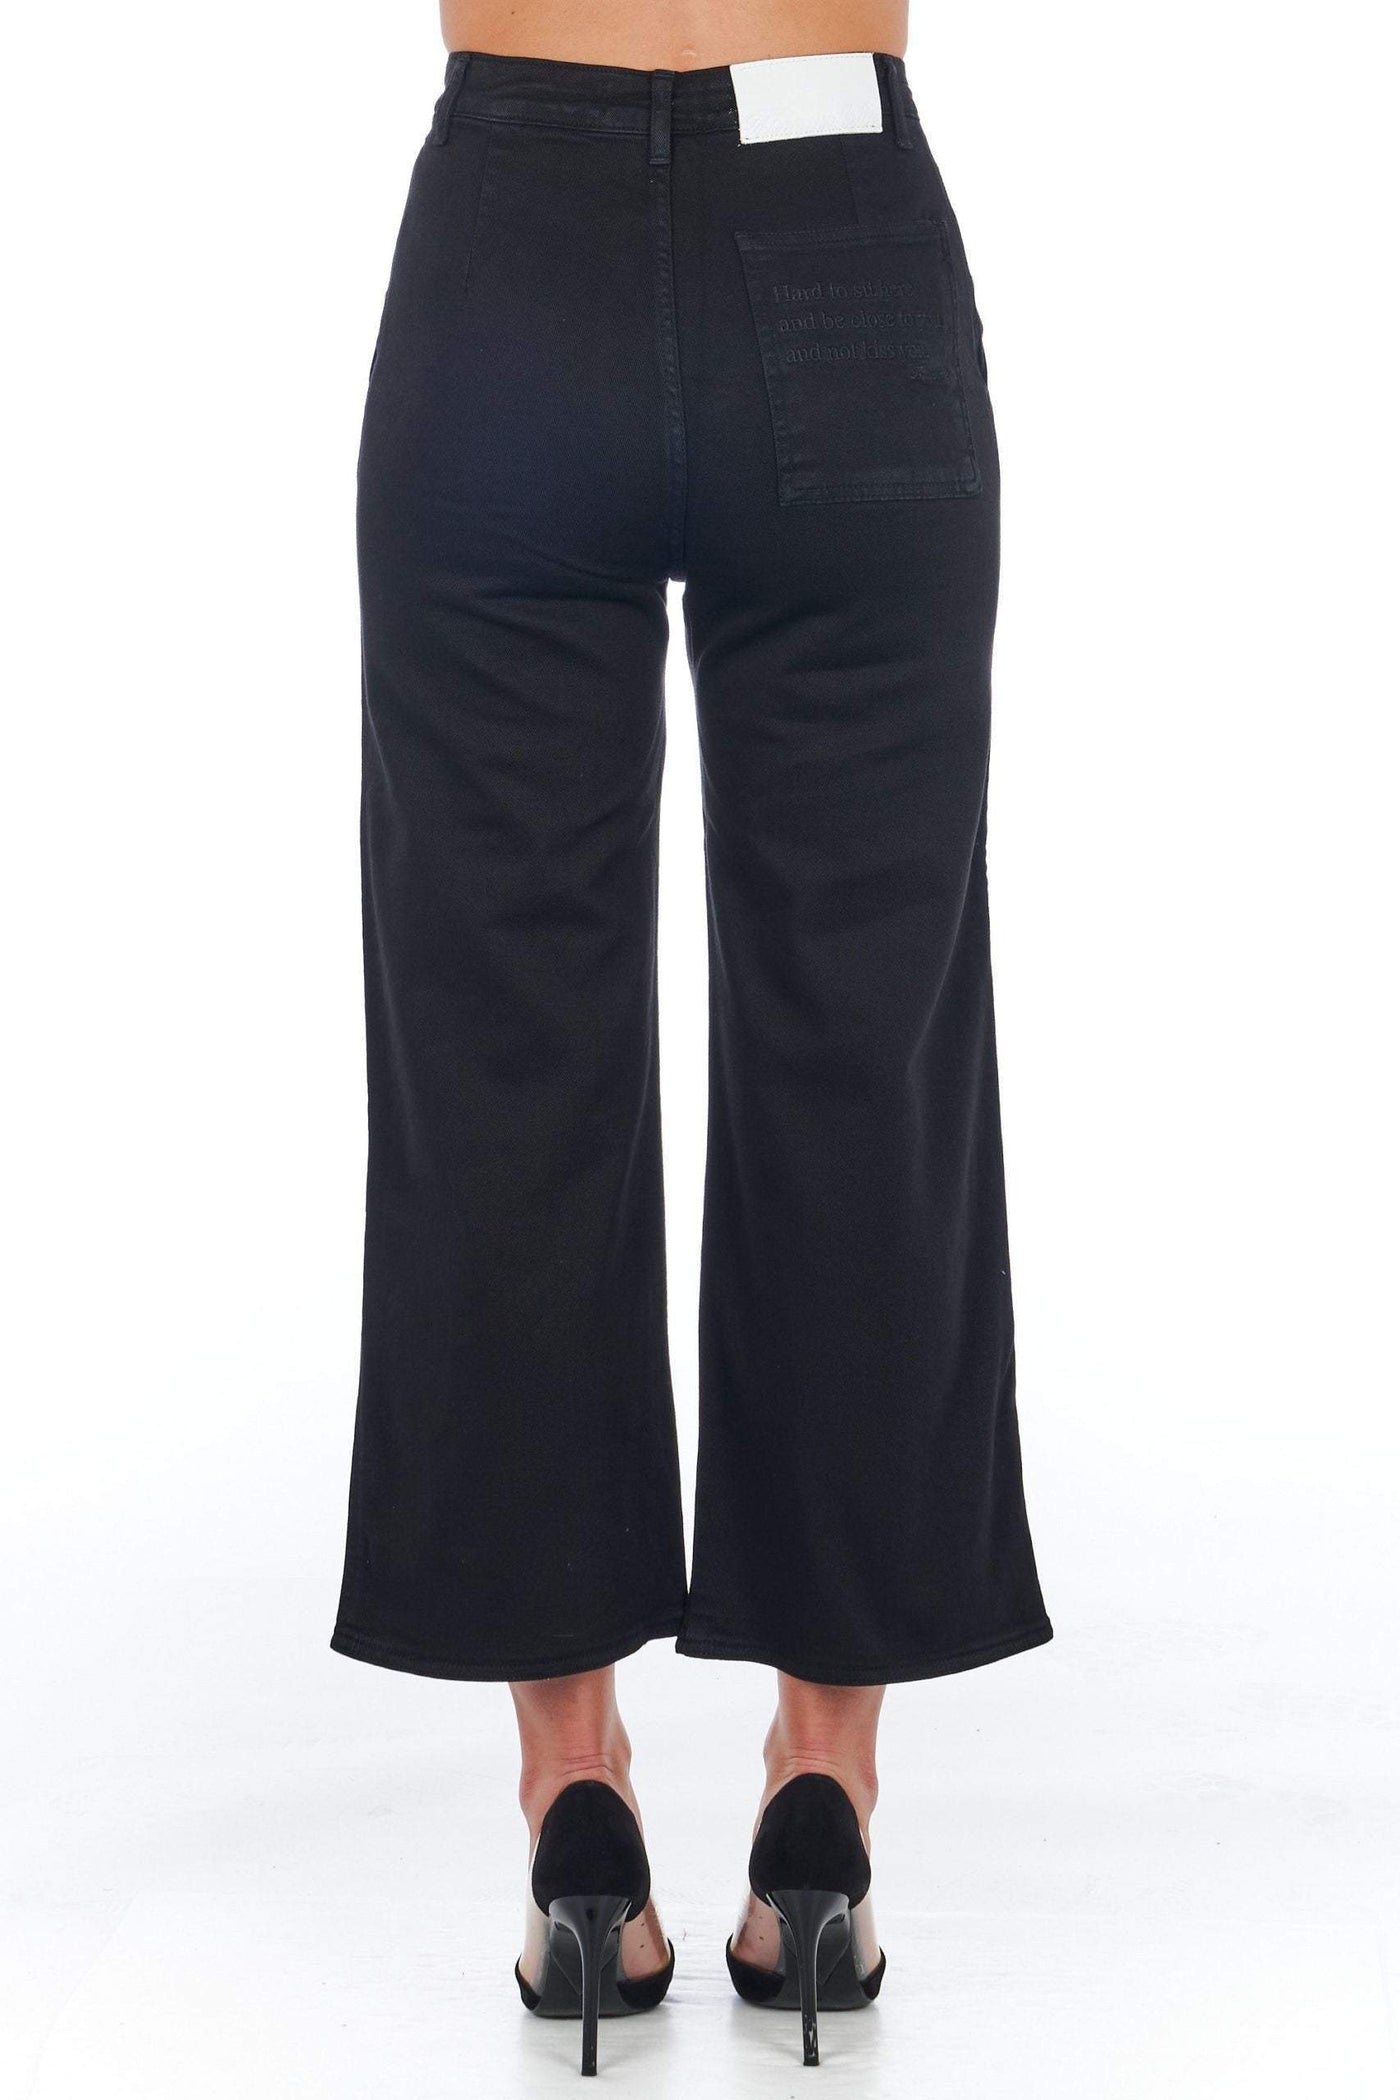 Frankie Morello high waisted multipockets Jeans & Pant #women, Black, feed-agegroup-adult, feed-color-Black, feed-gender-female, Frankie Morello, IT40 | XS, IT42 | S, IT44 | M, Jeans & Pants - Women - Clothing at SEYMAYKA